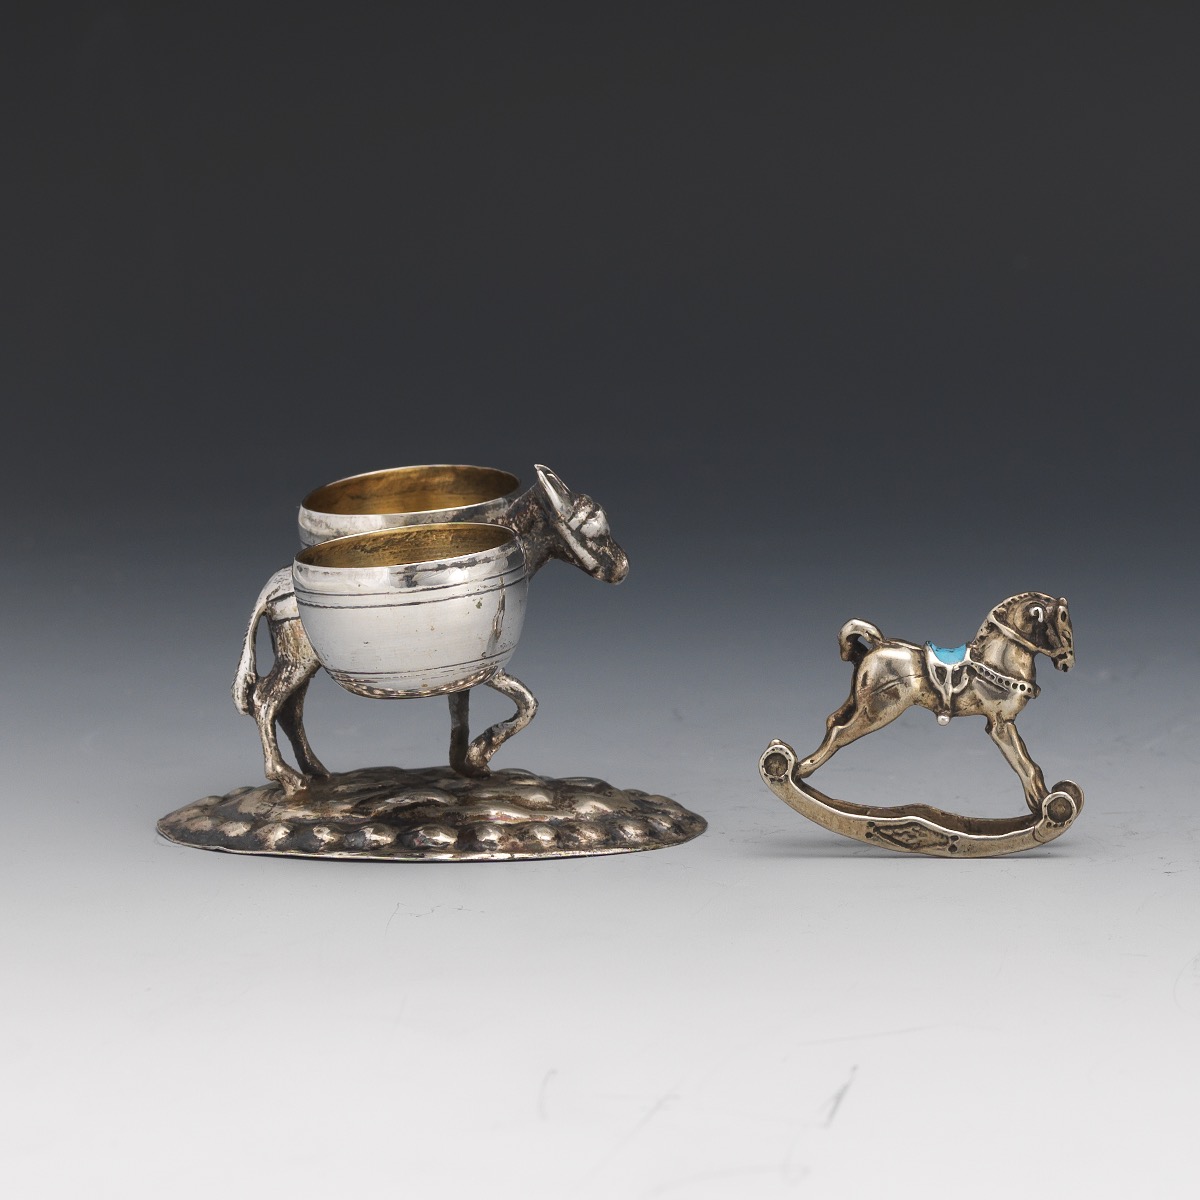 Italian Silver, Gold Wash and Enamel Donkey Salt/Pepper Cellar and Baby Rocking Horse - Image 2 of 7